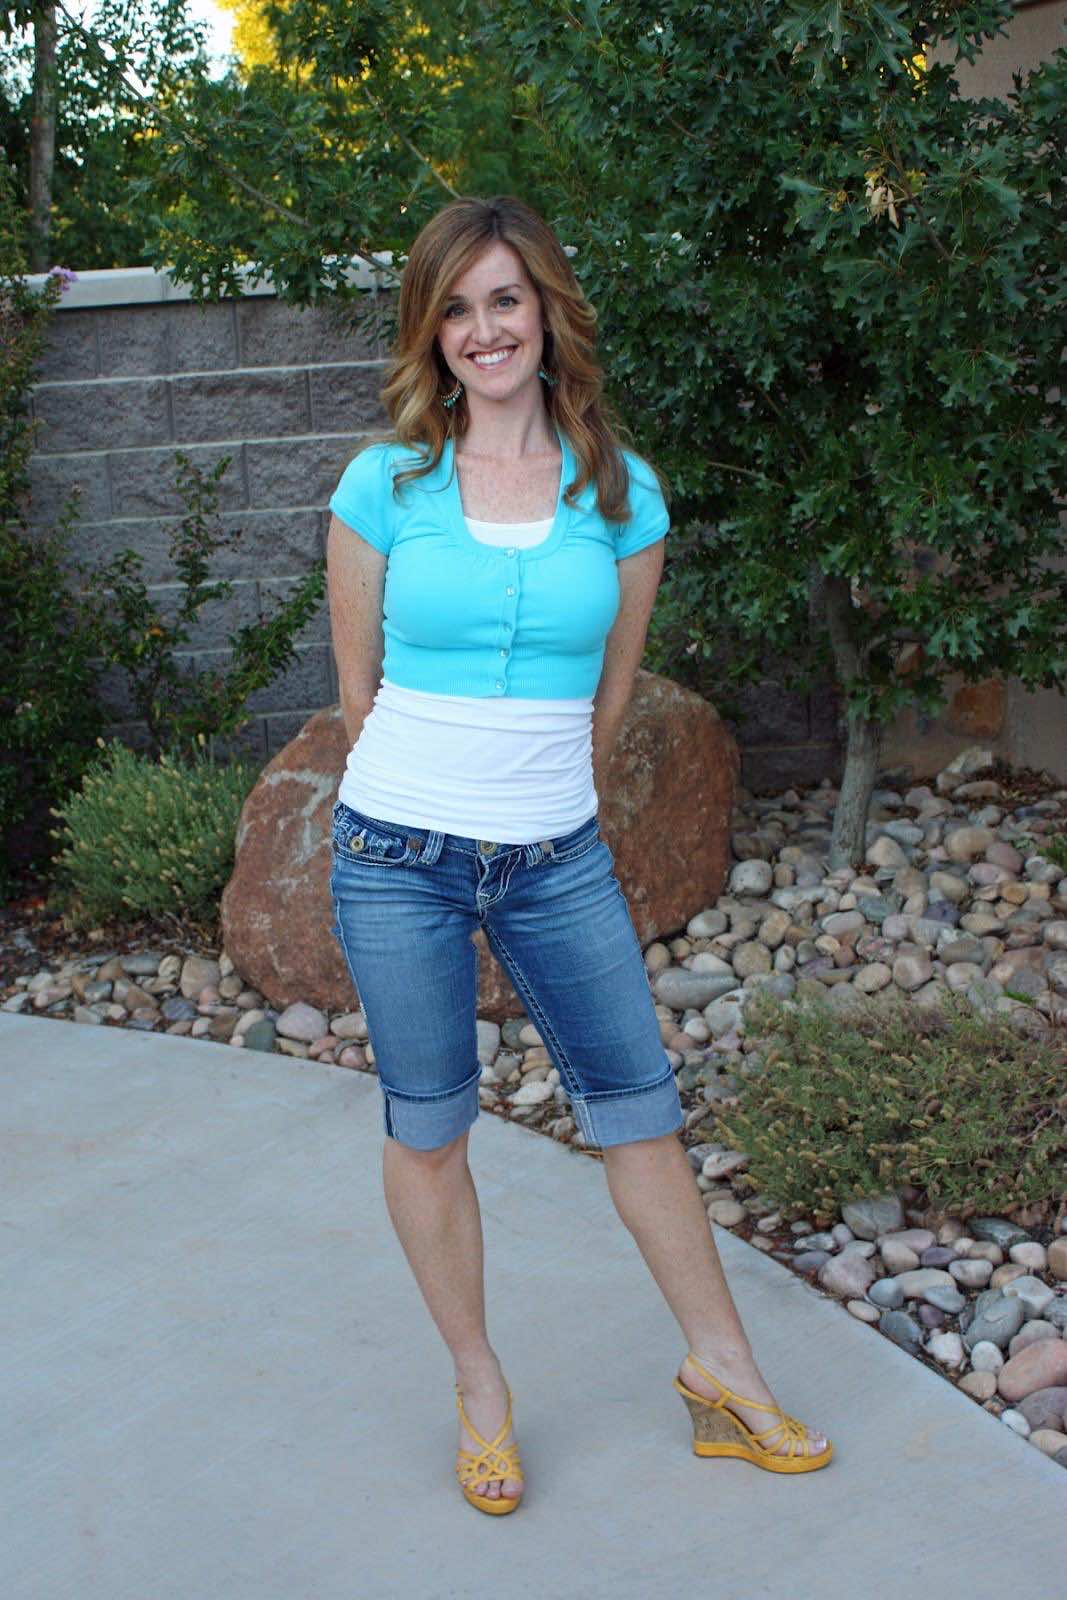 Mature In Tight Jeans Pictures